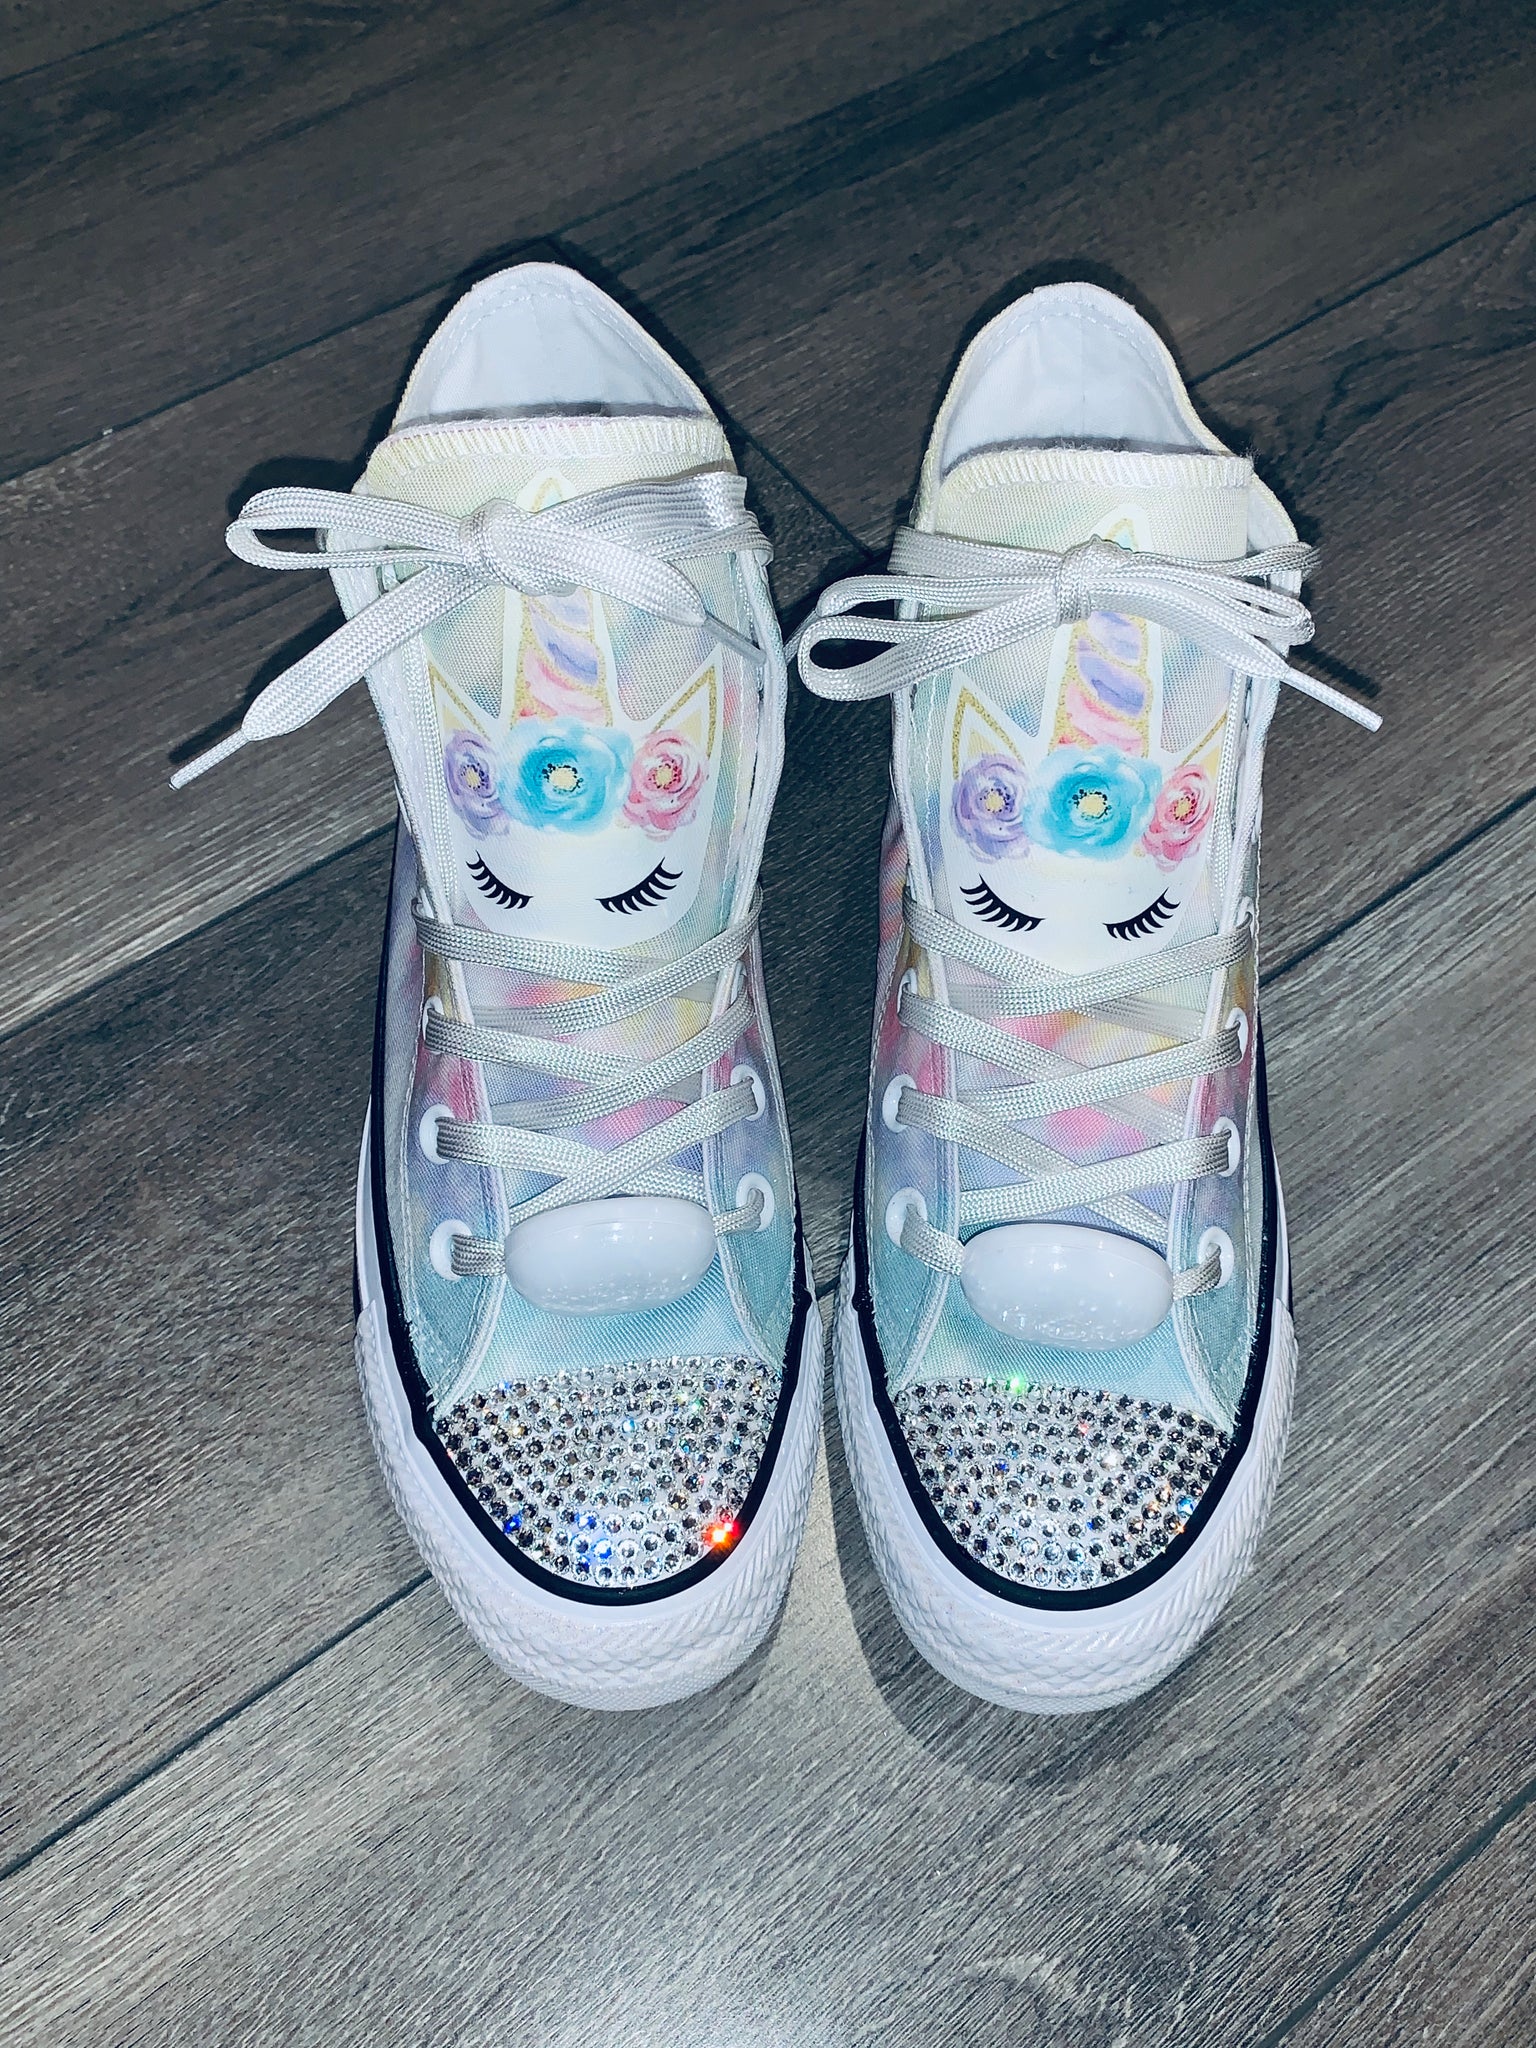 rhinestone converse for toddlers